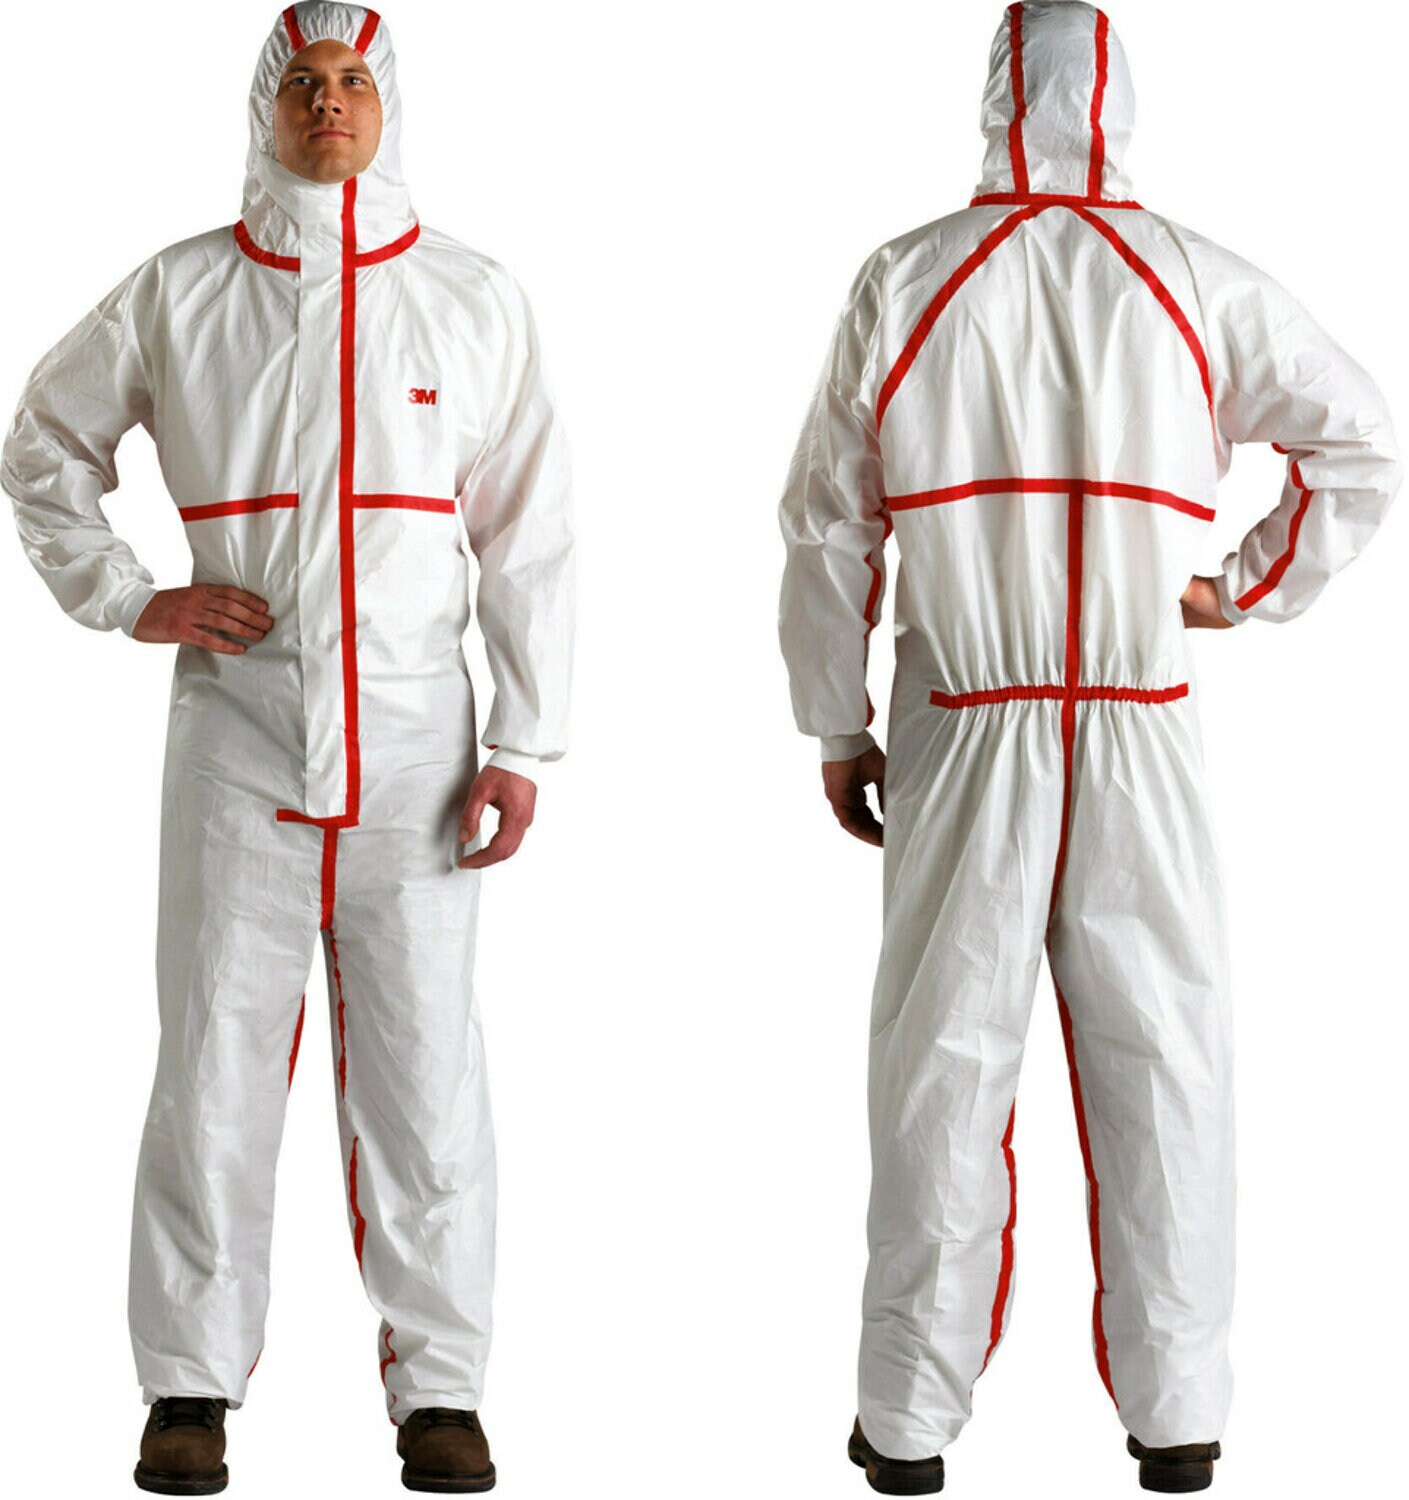 7000109048 - 3M Disposable Chemical Protective Coverall 4565-BLK-XL, 25 EA/Case